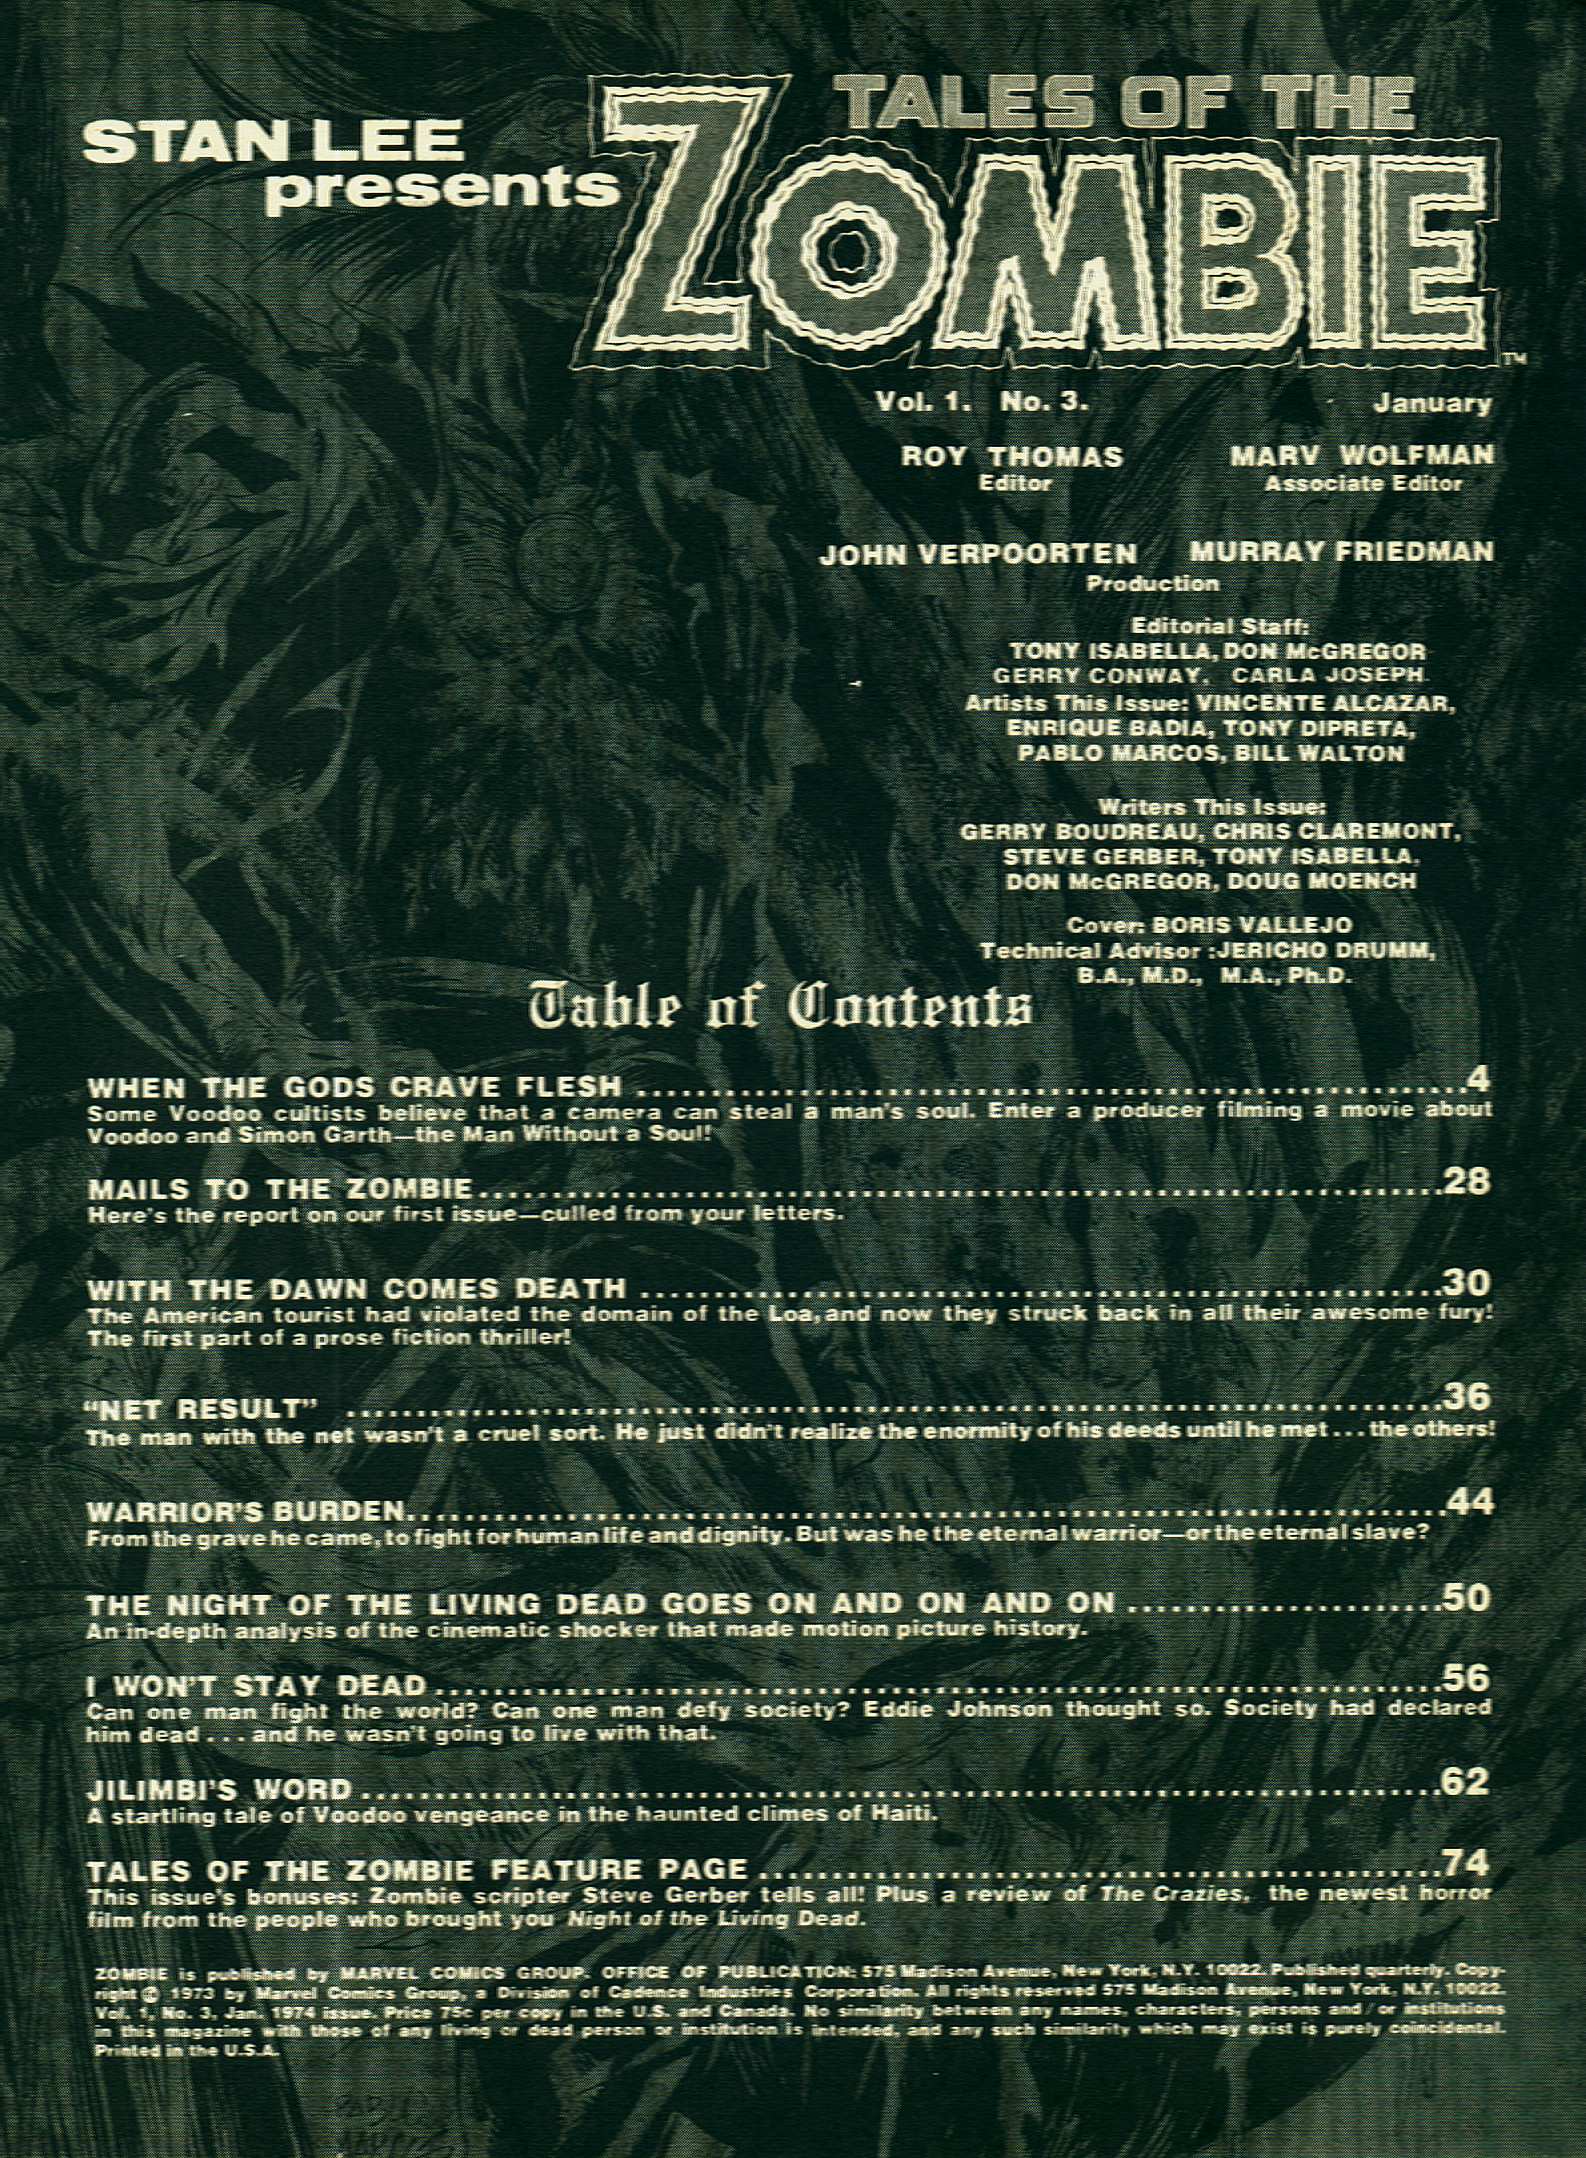 Read online Zombie comic -  Issue #3 - 3